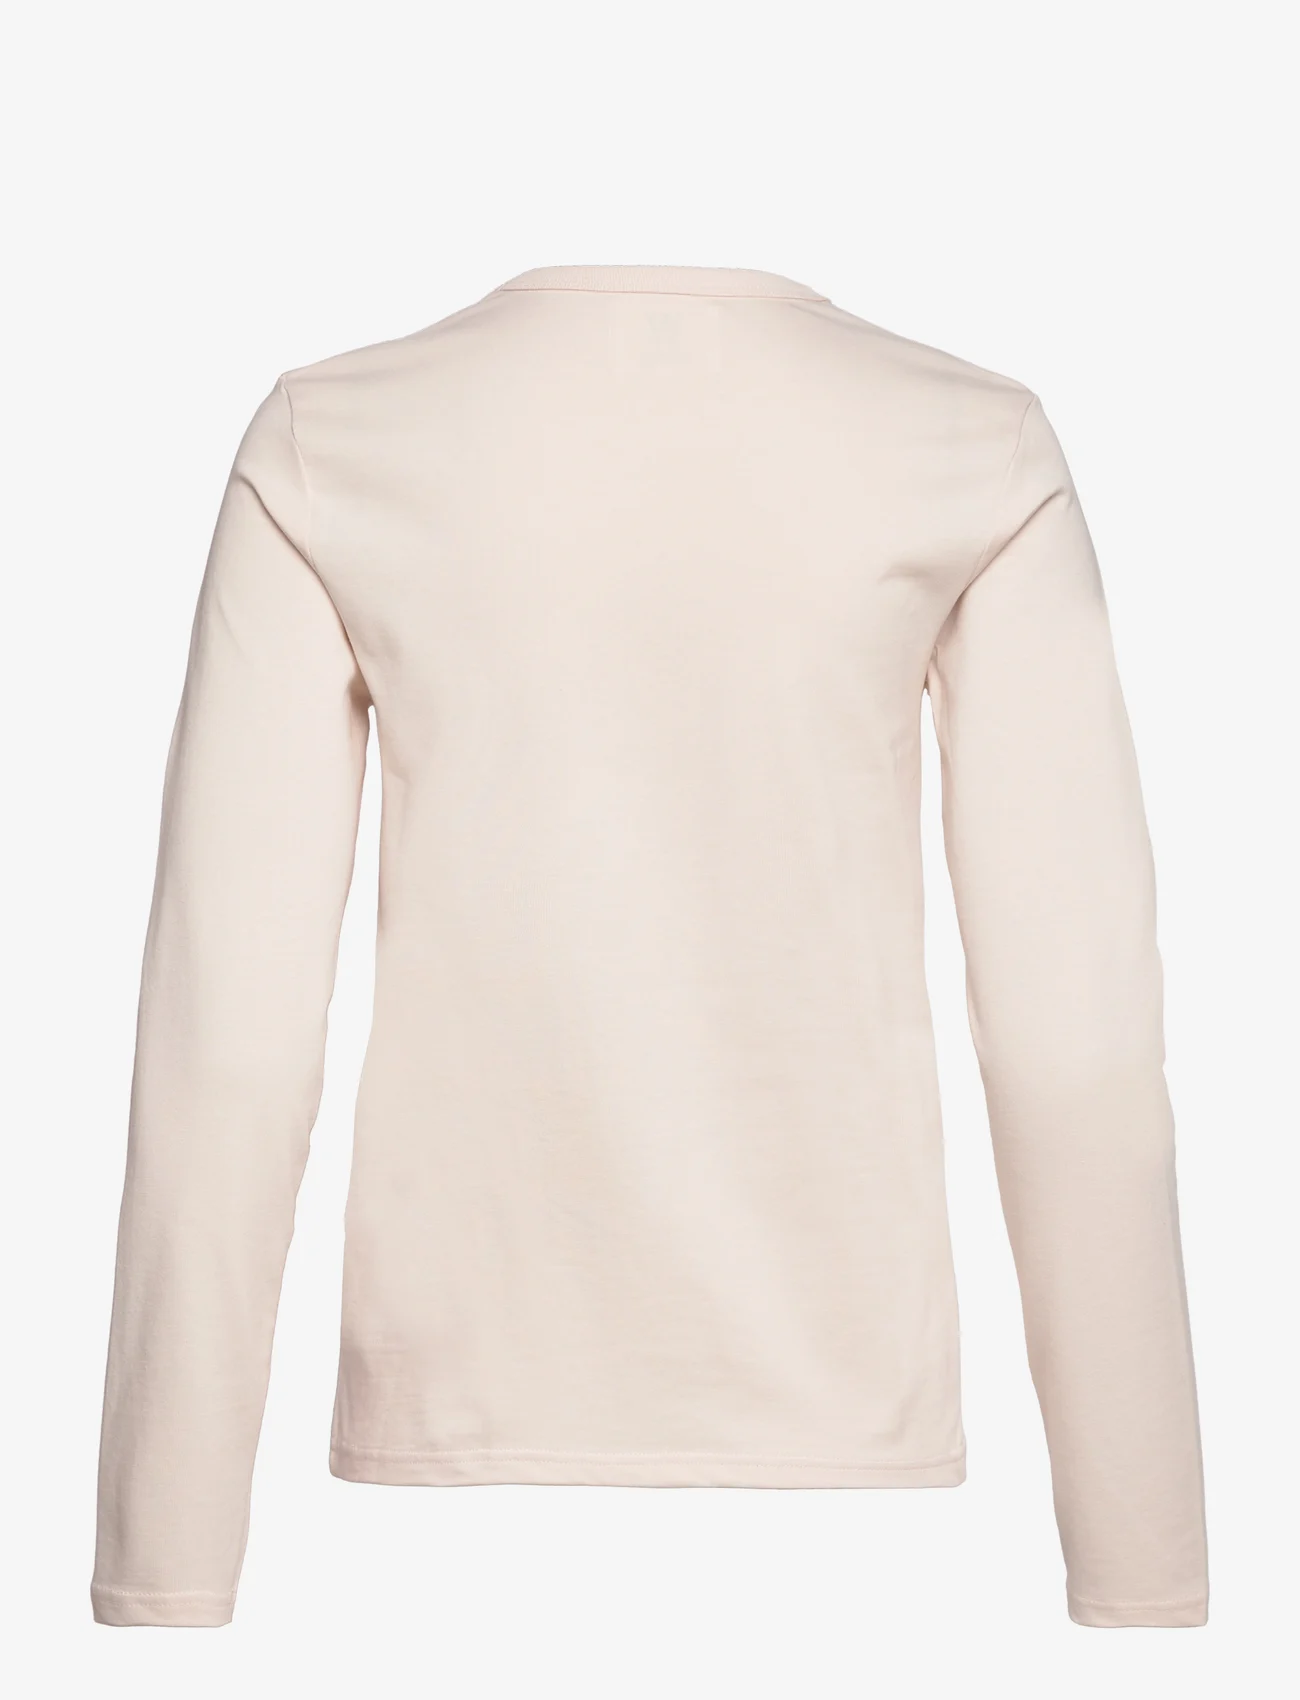 Double A by Wood Wood - Moa longsleeve - langærmede toppe - almost mauve - 1